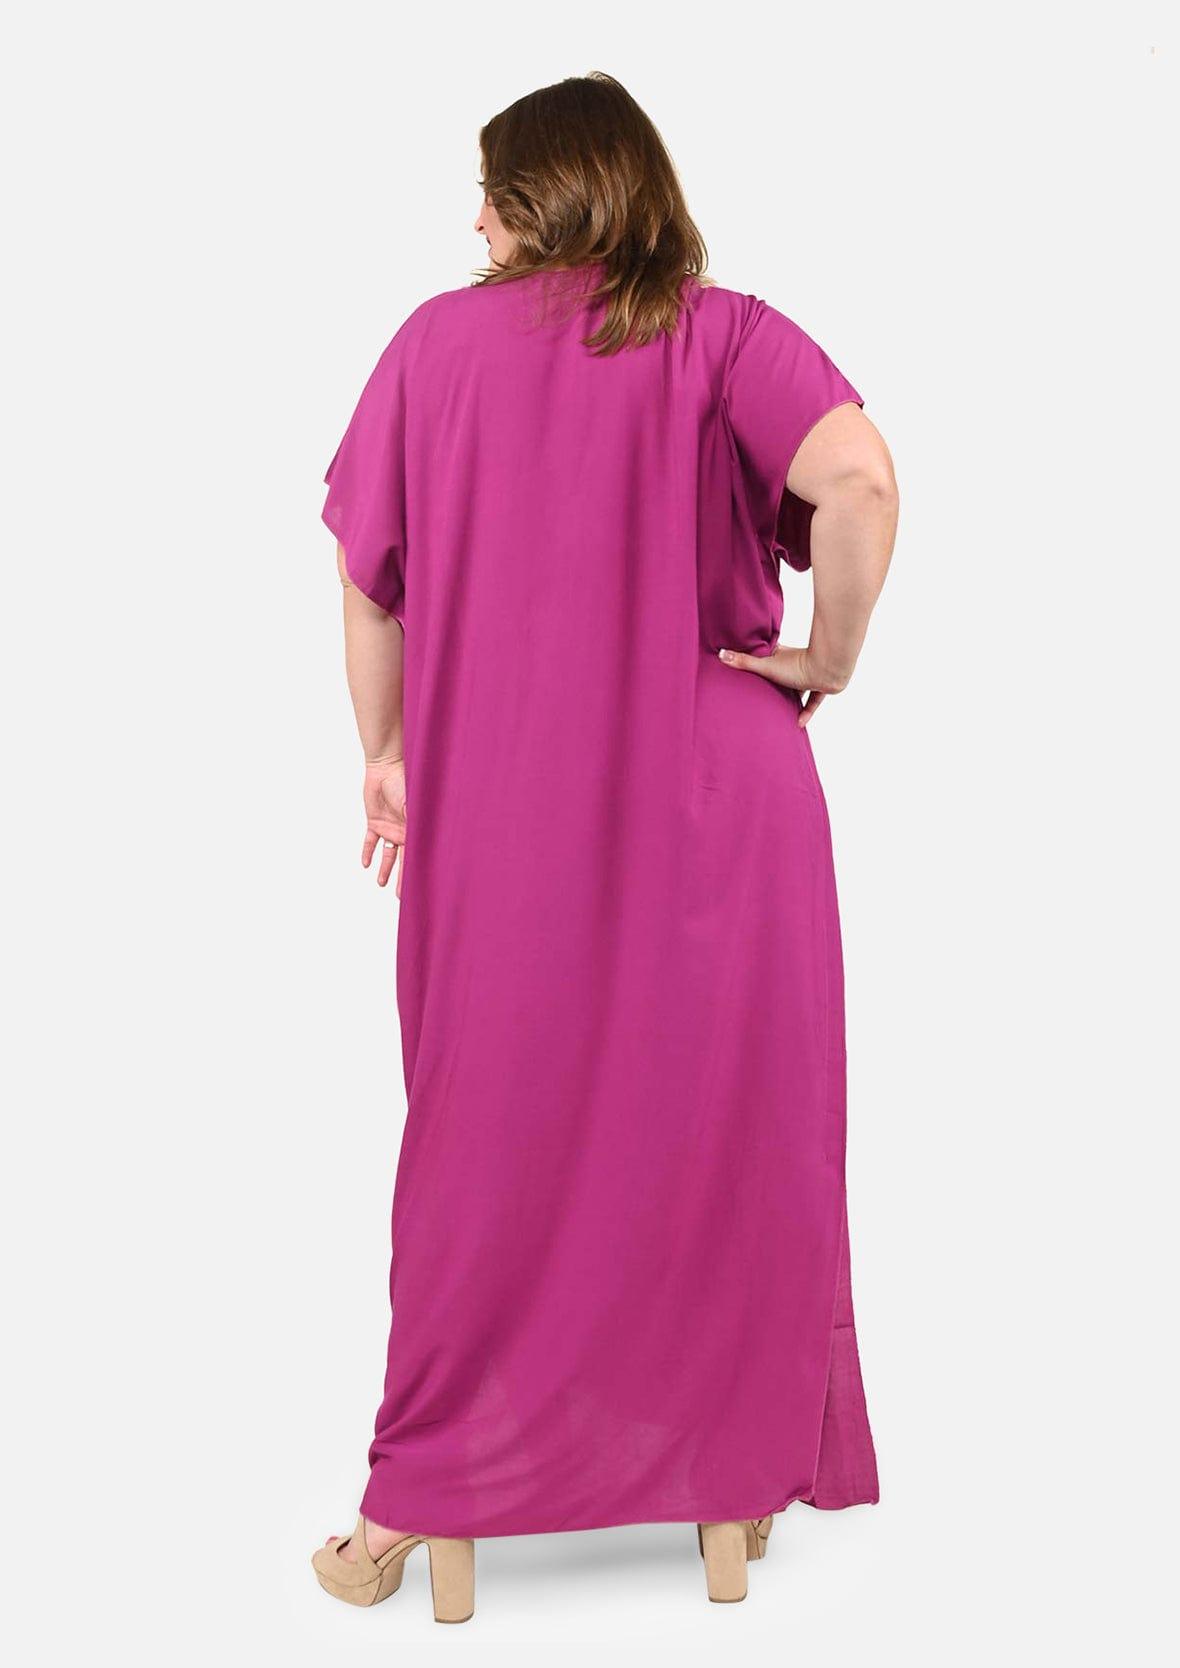 Maxi Kaftan With Embroidered Neck